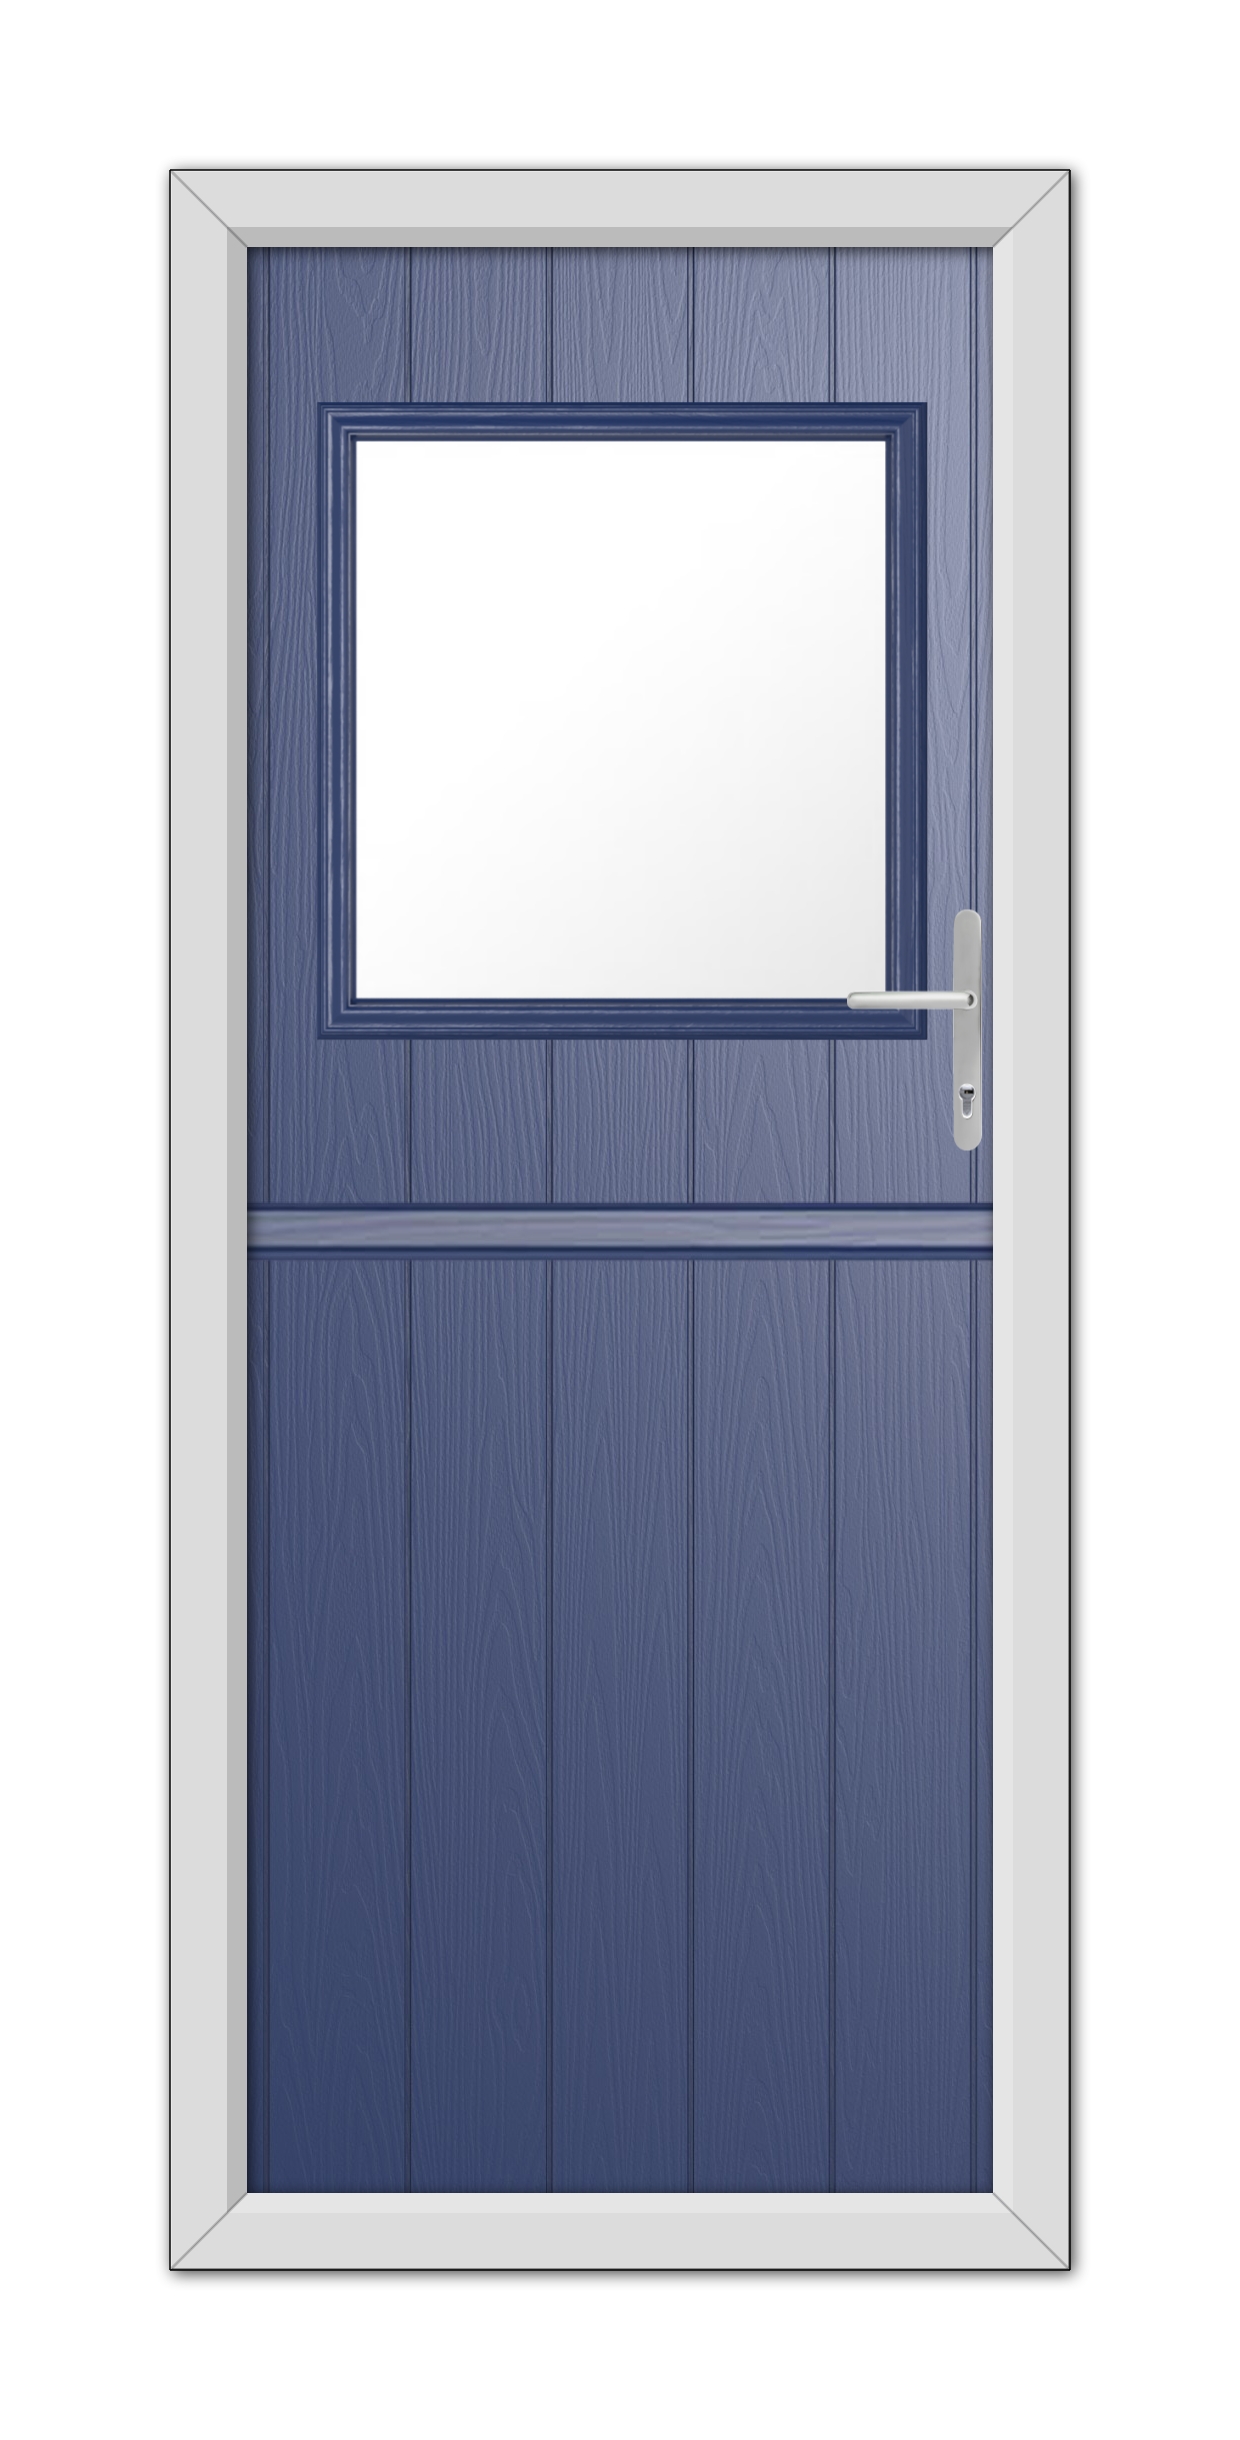 A Blue Fife Stable Composite Door 48mm Timber Core with a horizontal window at the top and a white handle, set within a white frame.